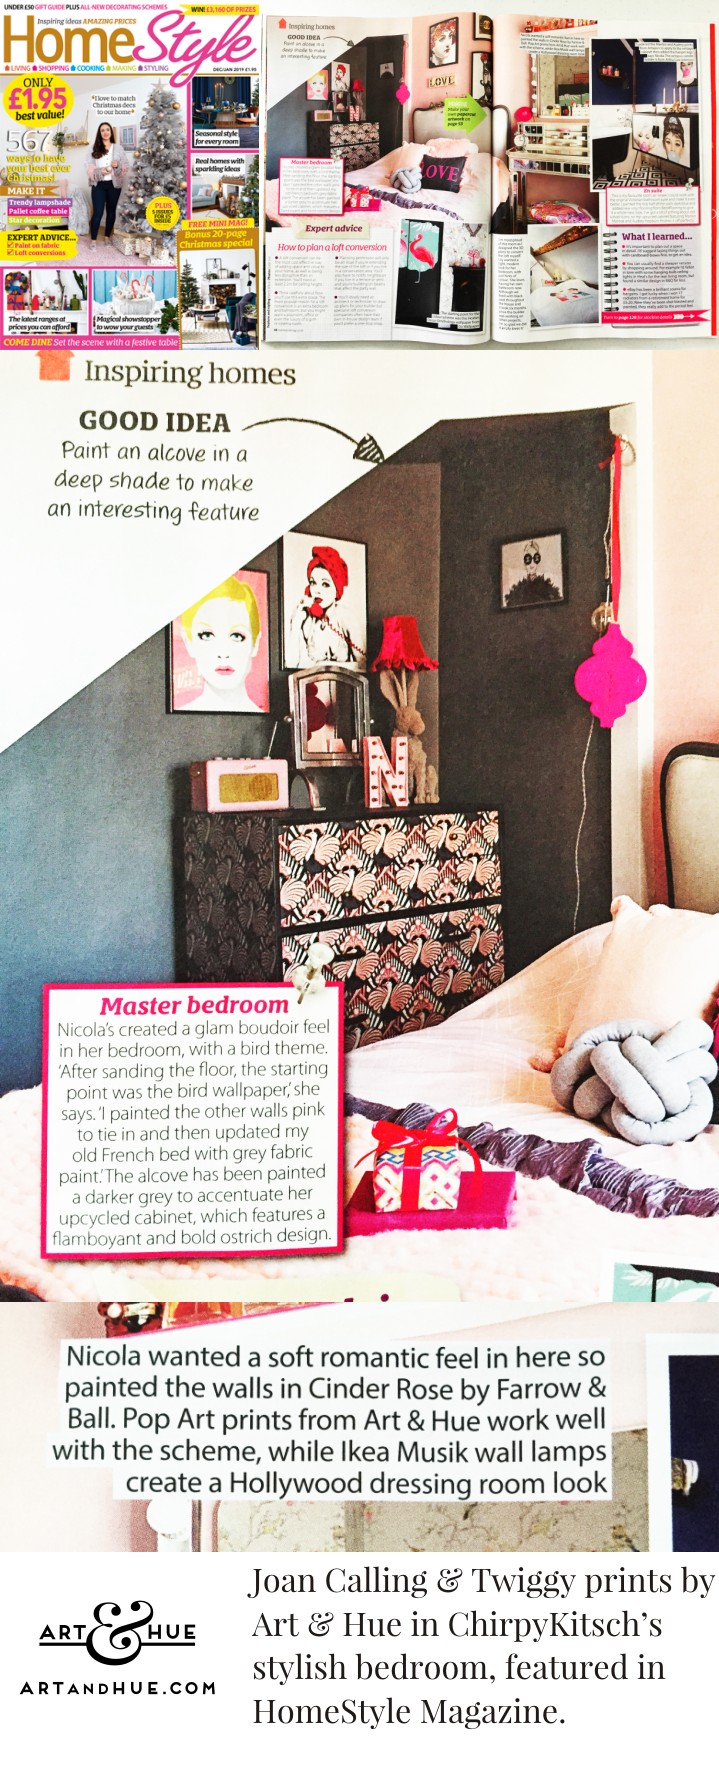 HomeStyle Magazine featuring ChirpyKitschs bedroom with Art & Hue prints